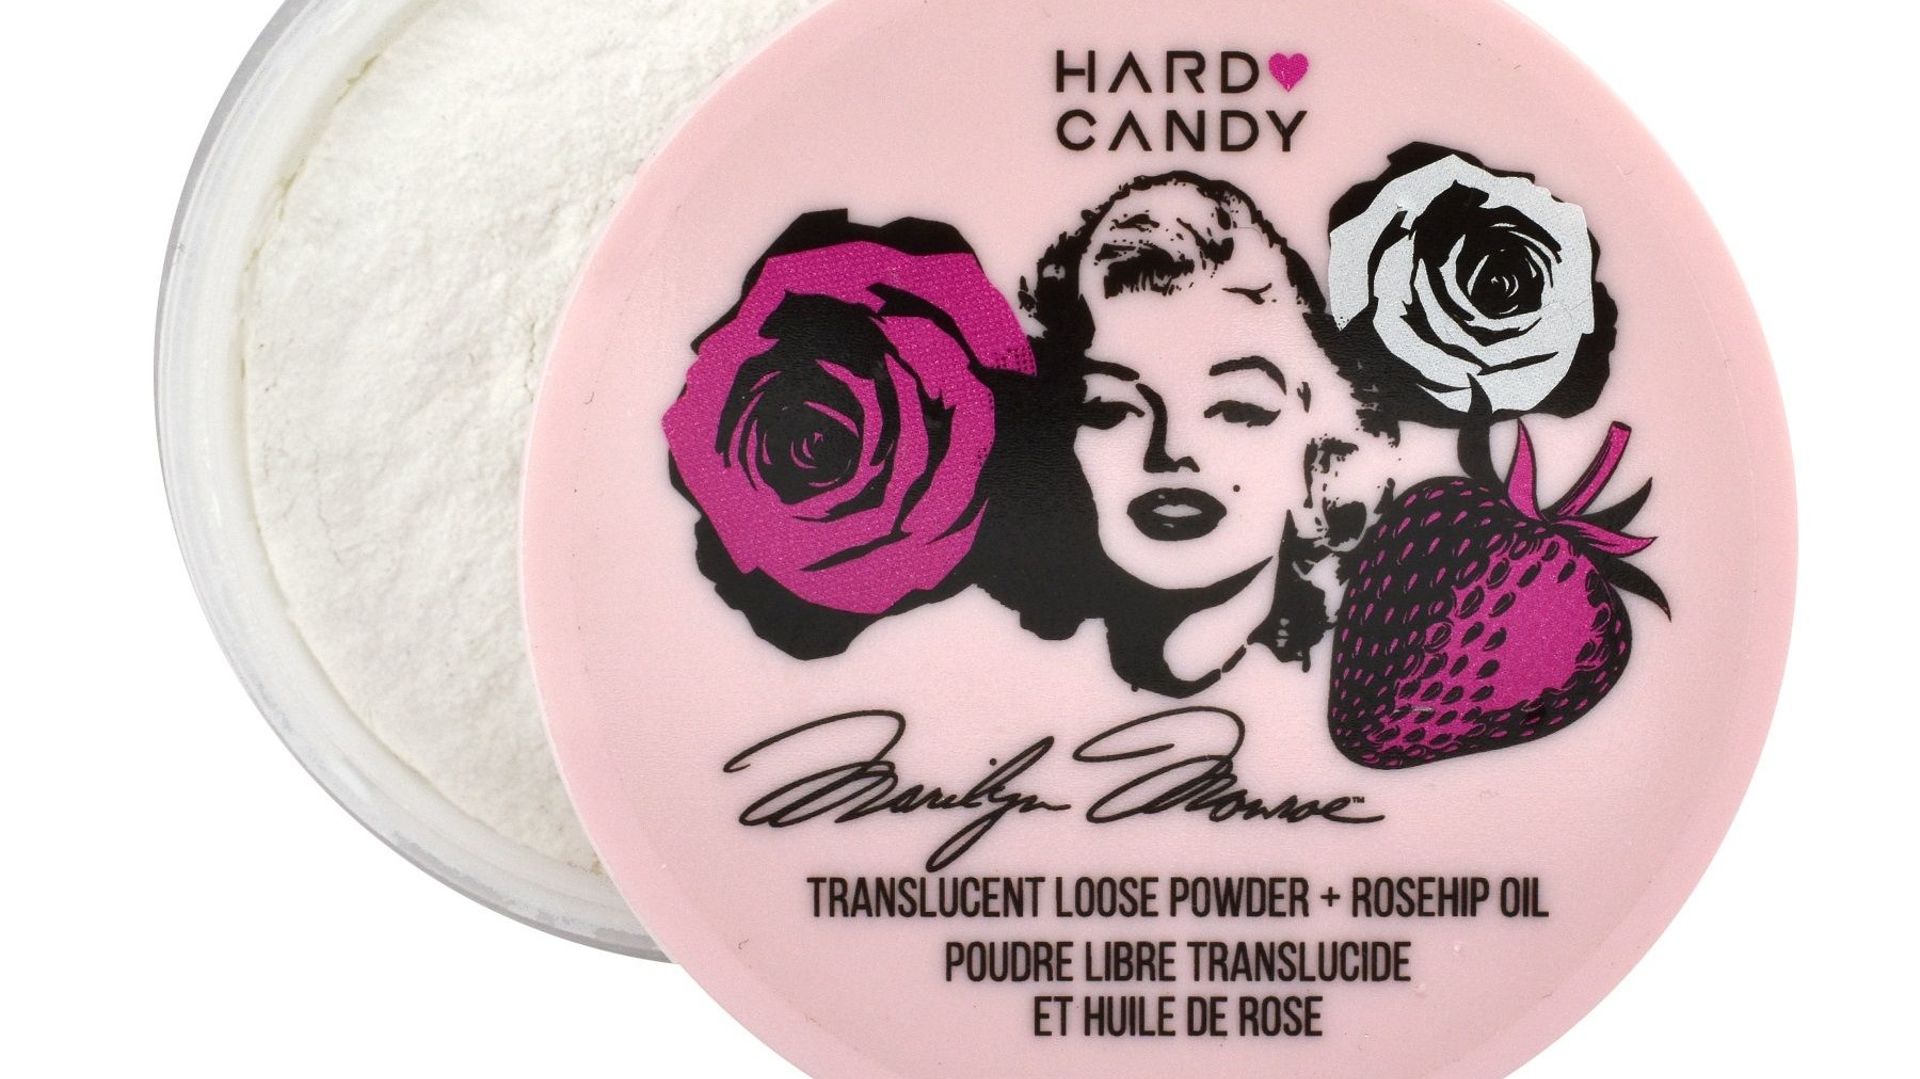 Hard Candy Marilyn Monroe - poudre libre pour le corps Sparkling Strawberry